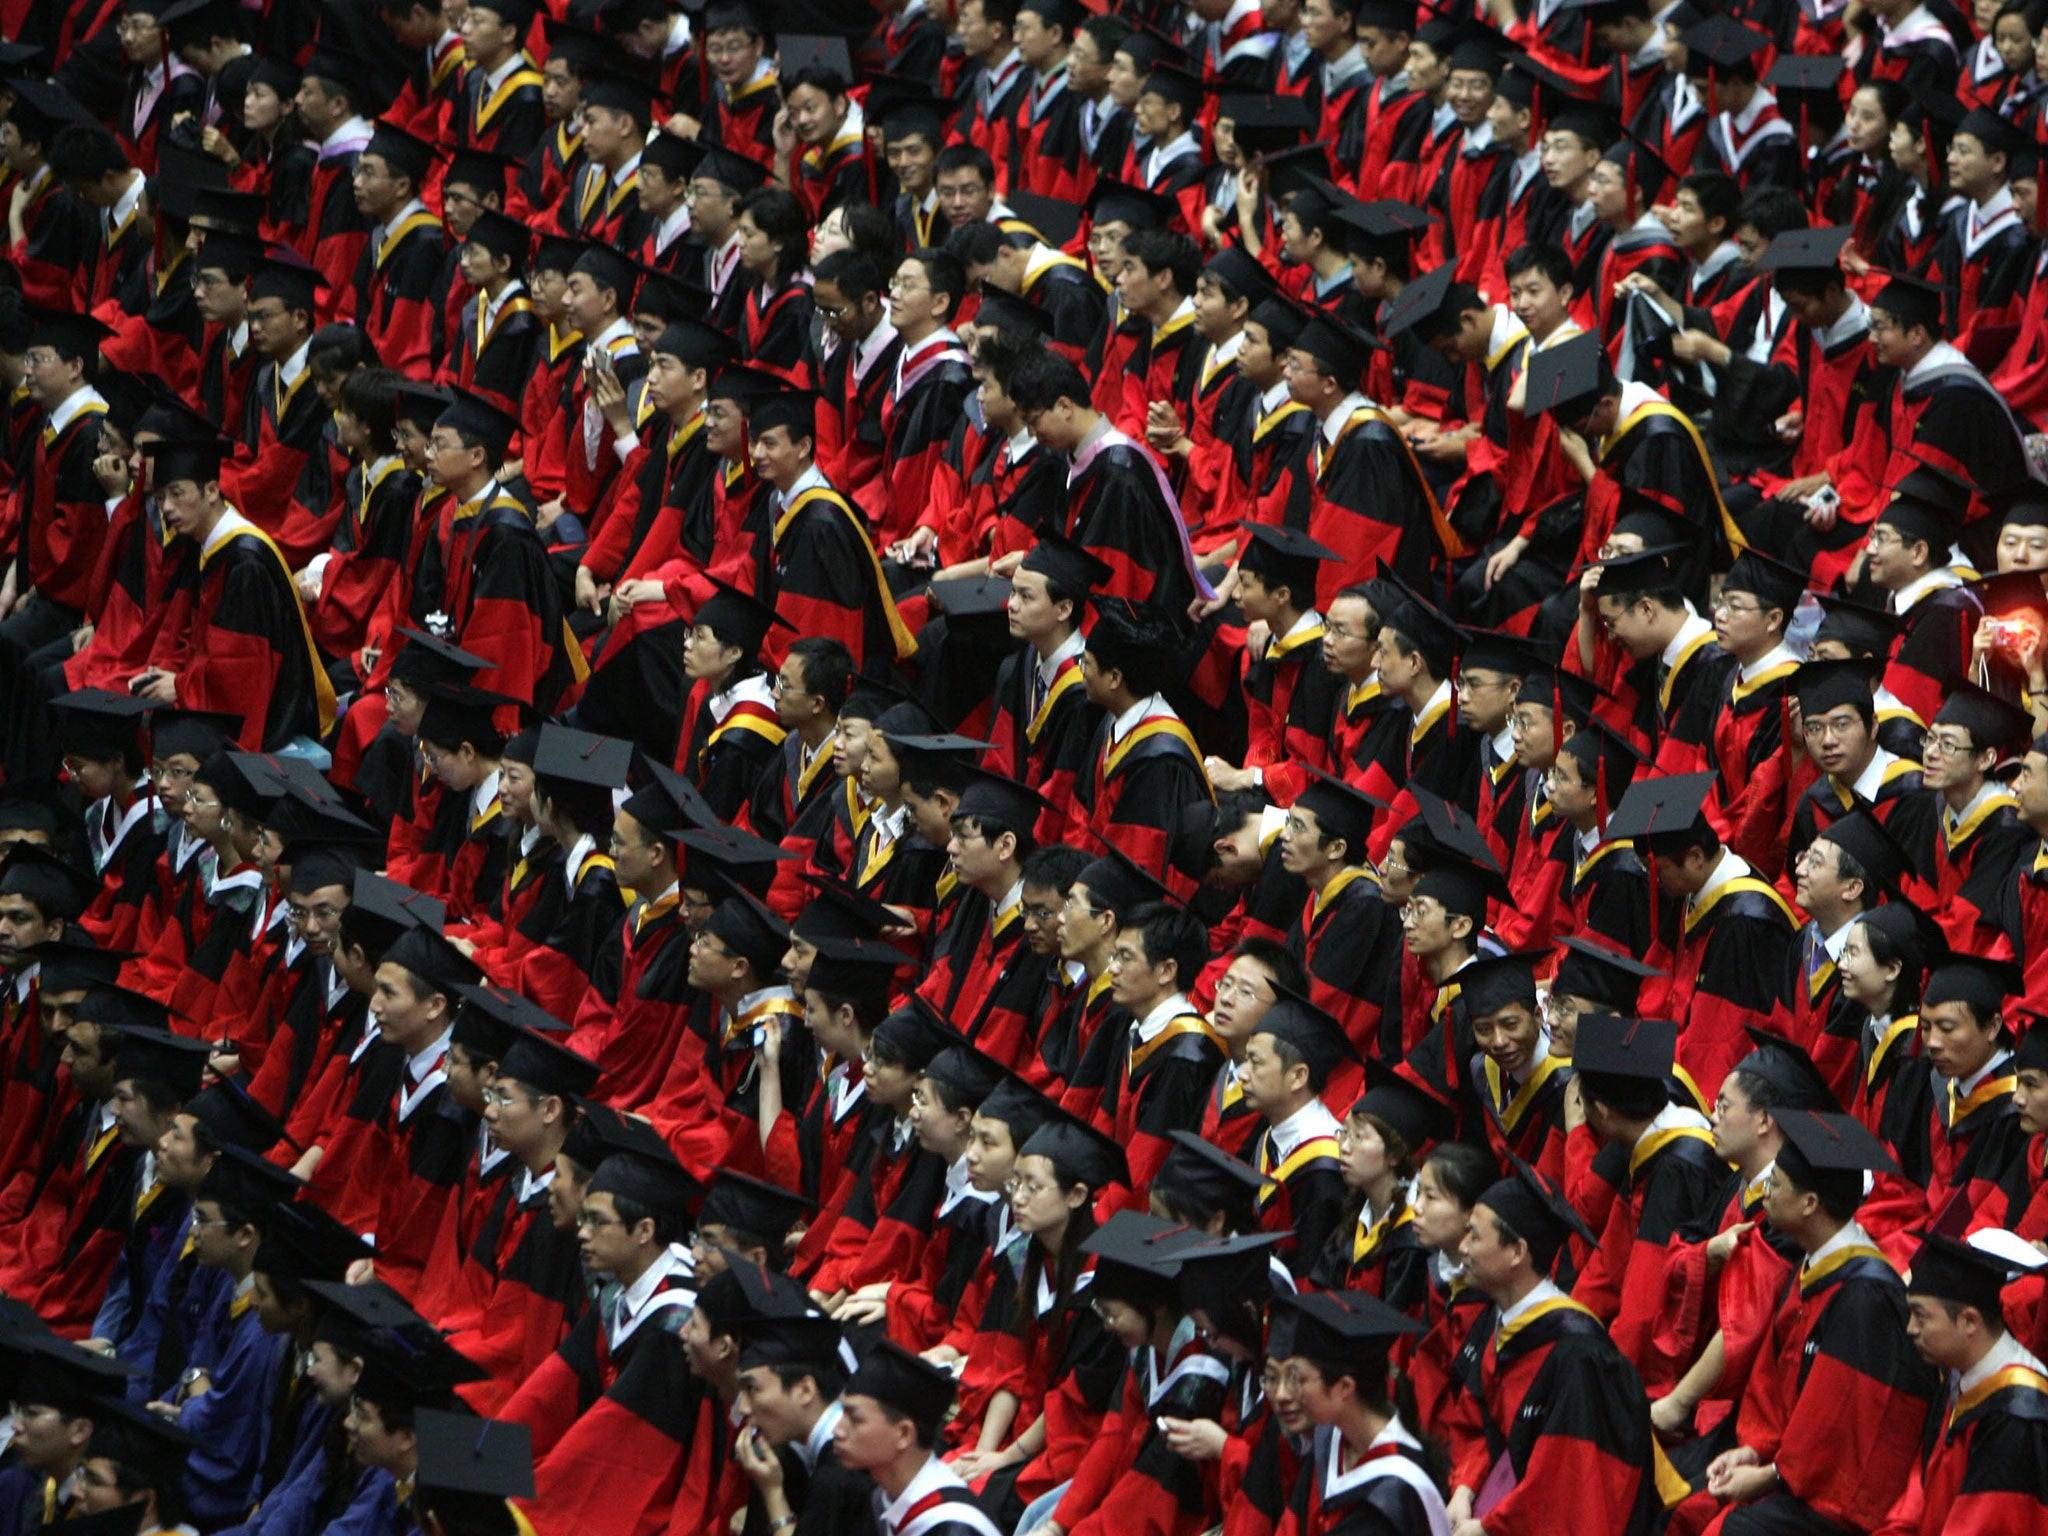 Students graduate during a ceremony held for 3,768 master and 898 doctorates being given out at the Tsinghua University on July 18, 2007 in Beijing, China.